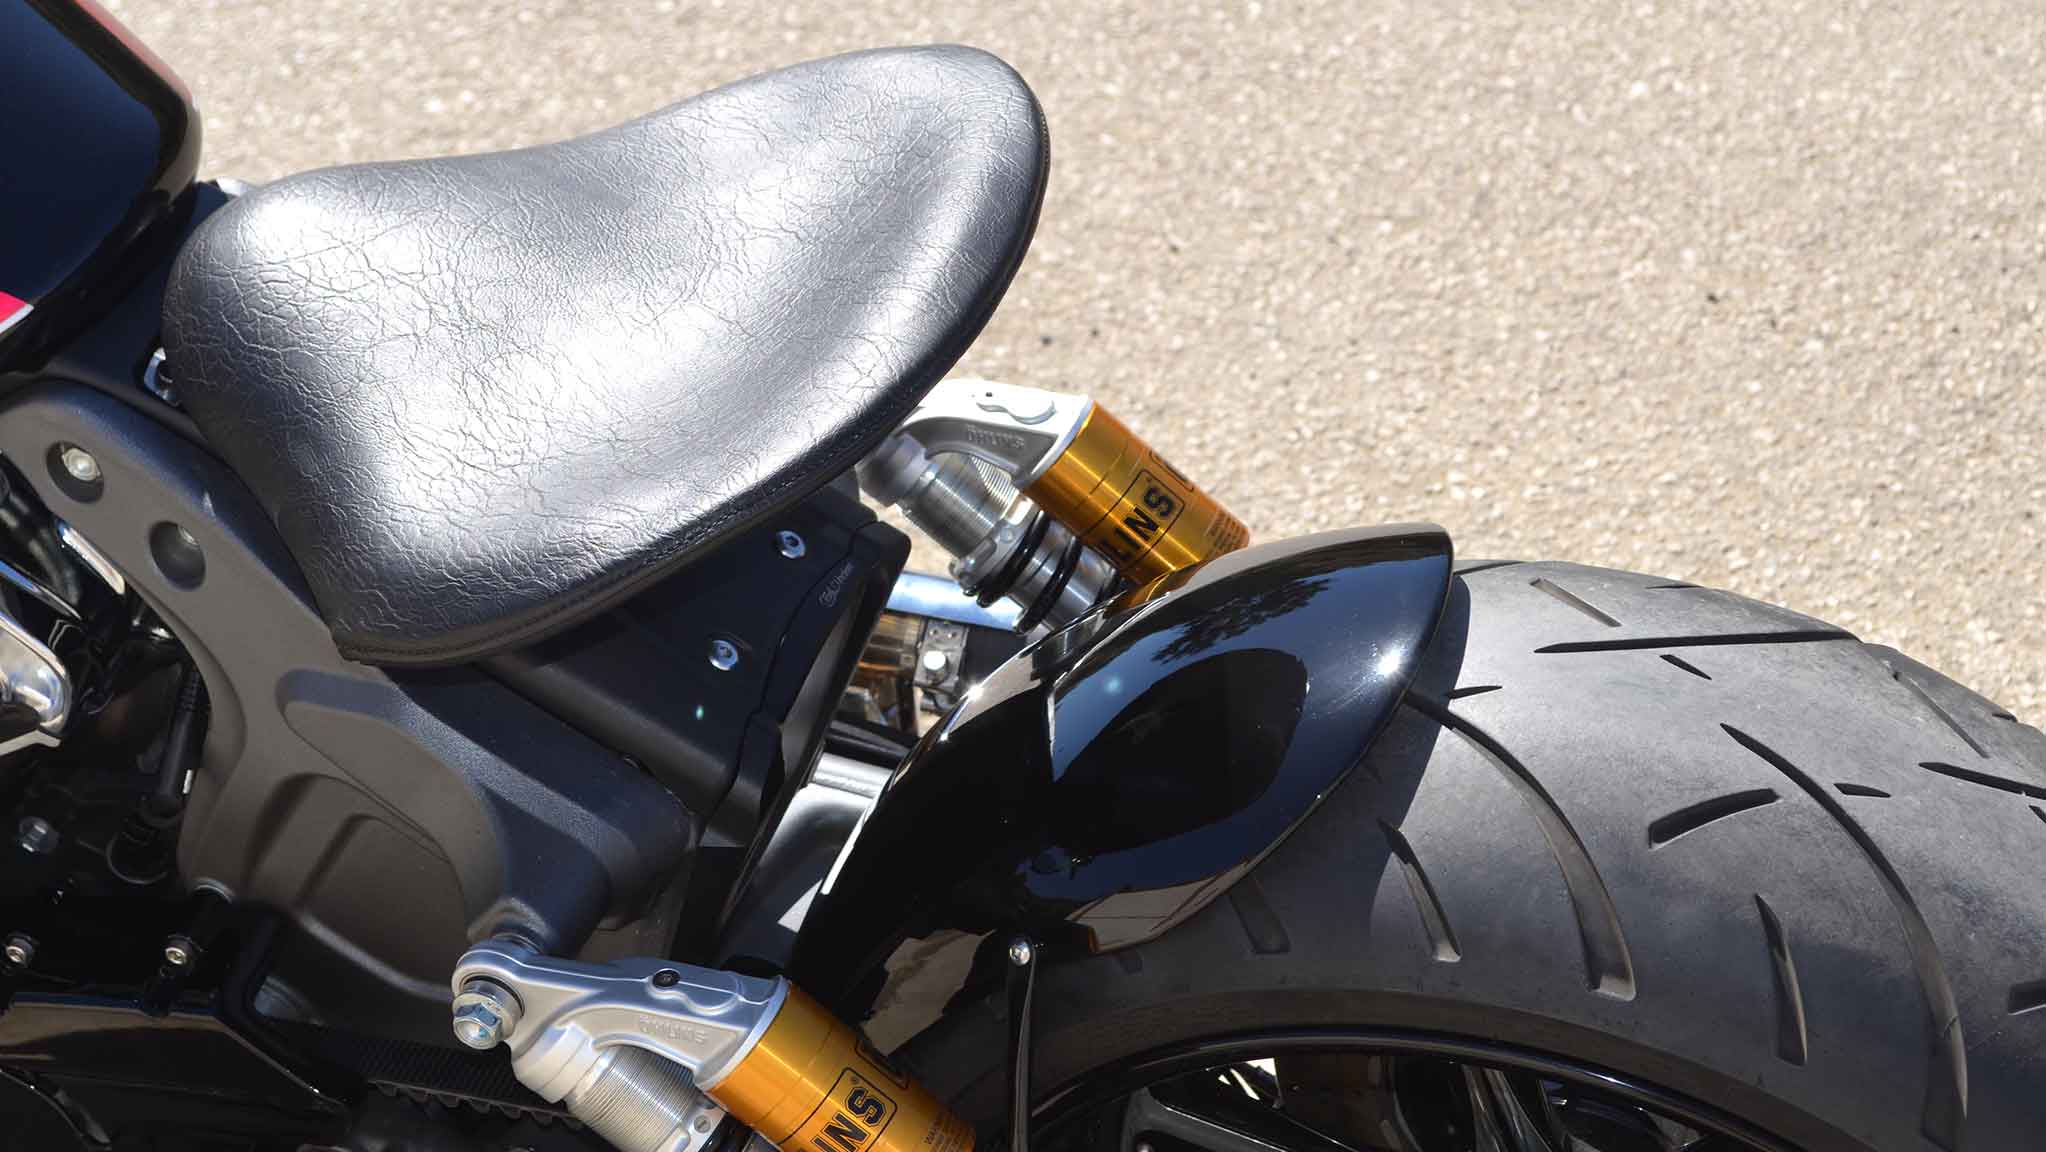 View of seat and rear mudguard